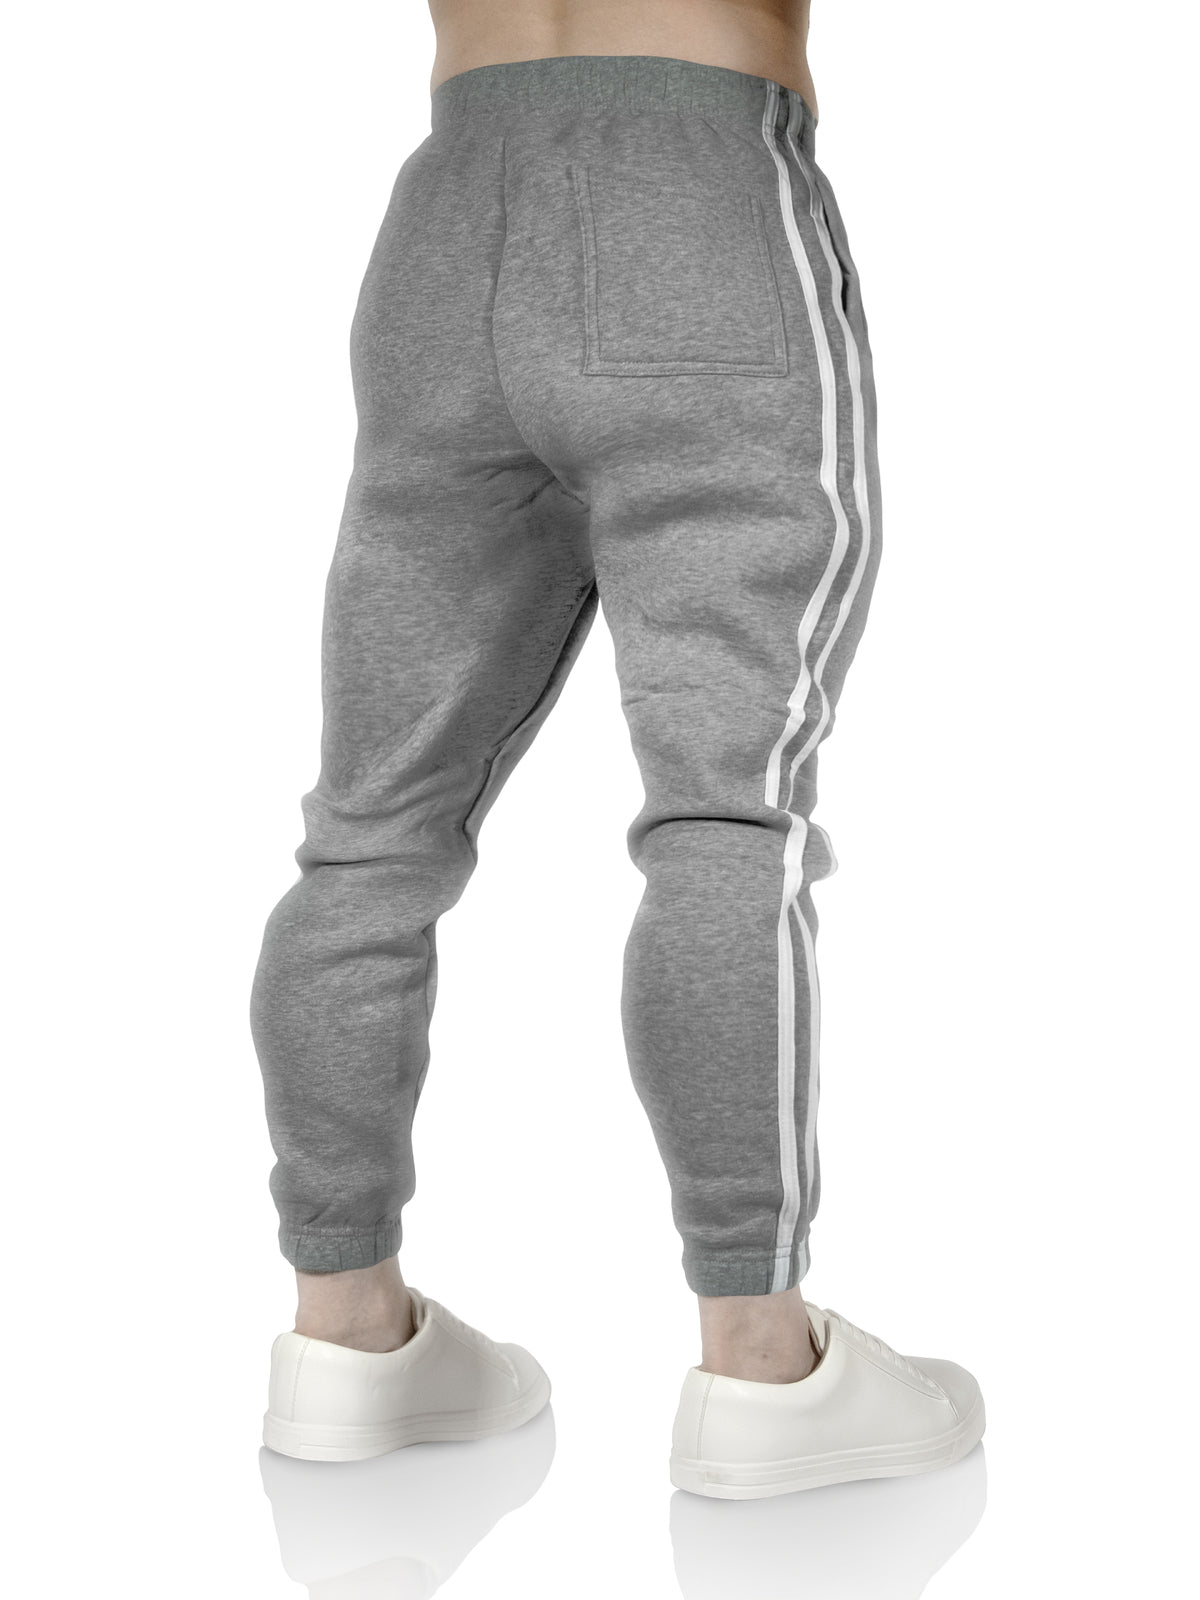 Mens Fleece Skinny Track Pants Jogger Gym Casual Sweat Trackies Warm Trousers - Grey Marle/White Stripe - S